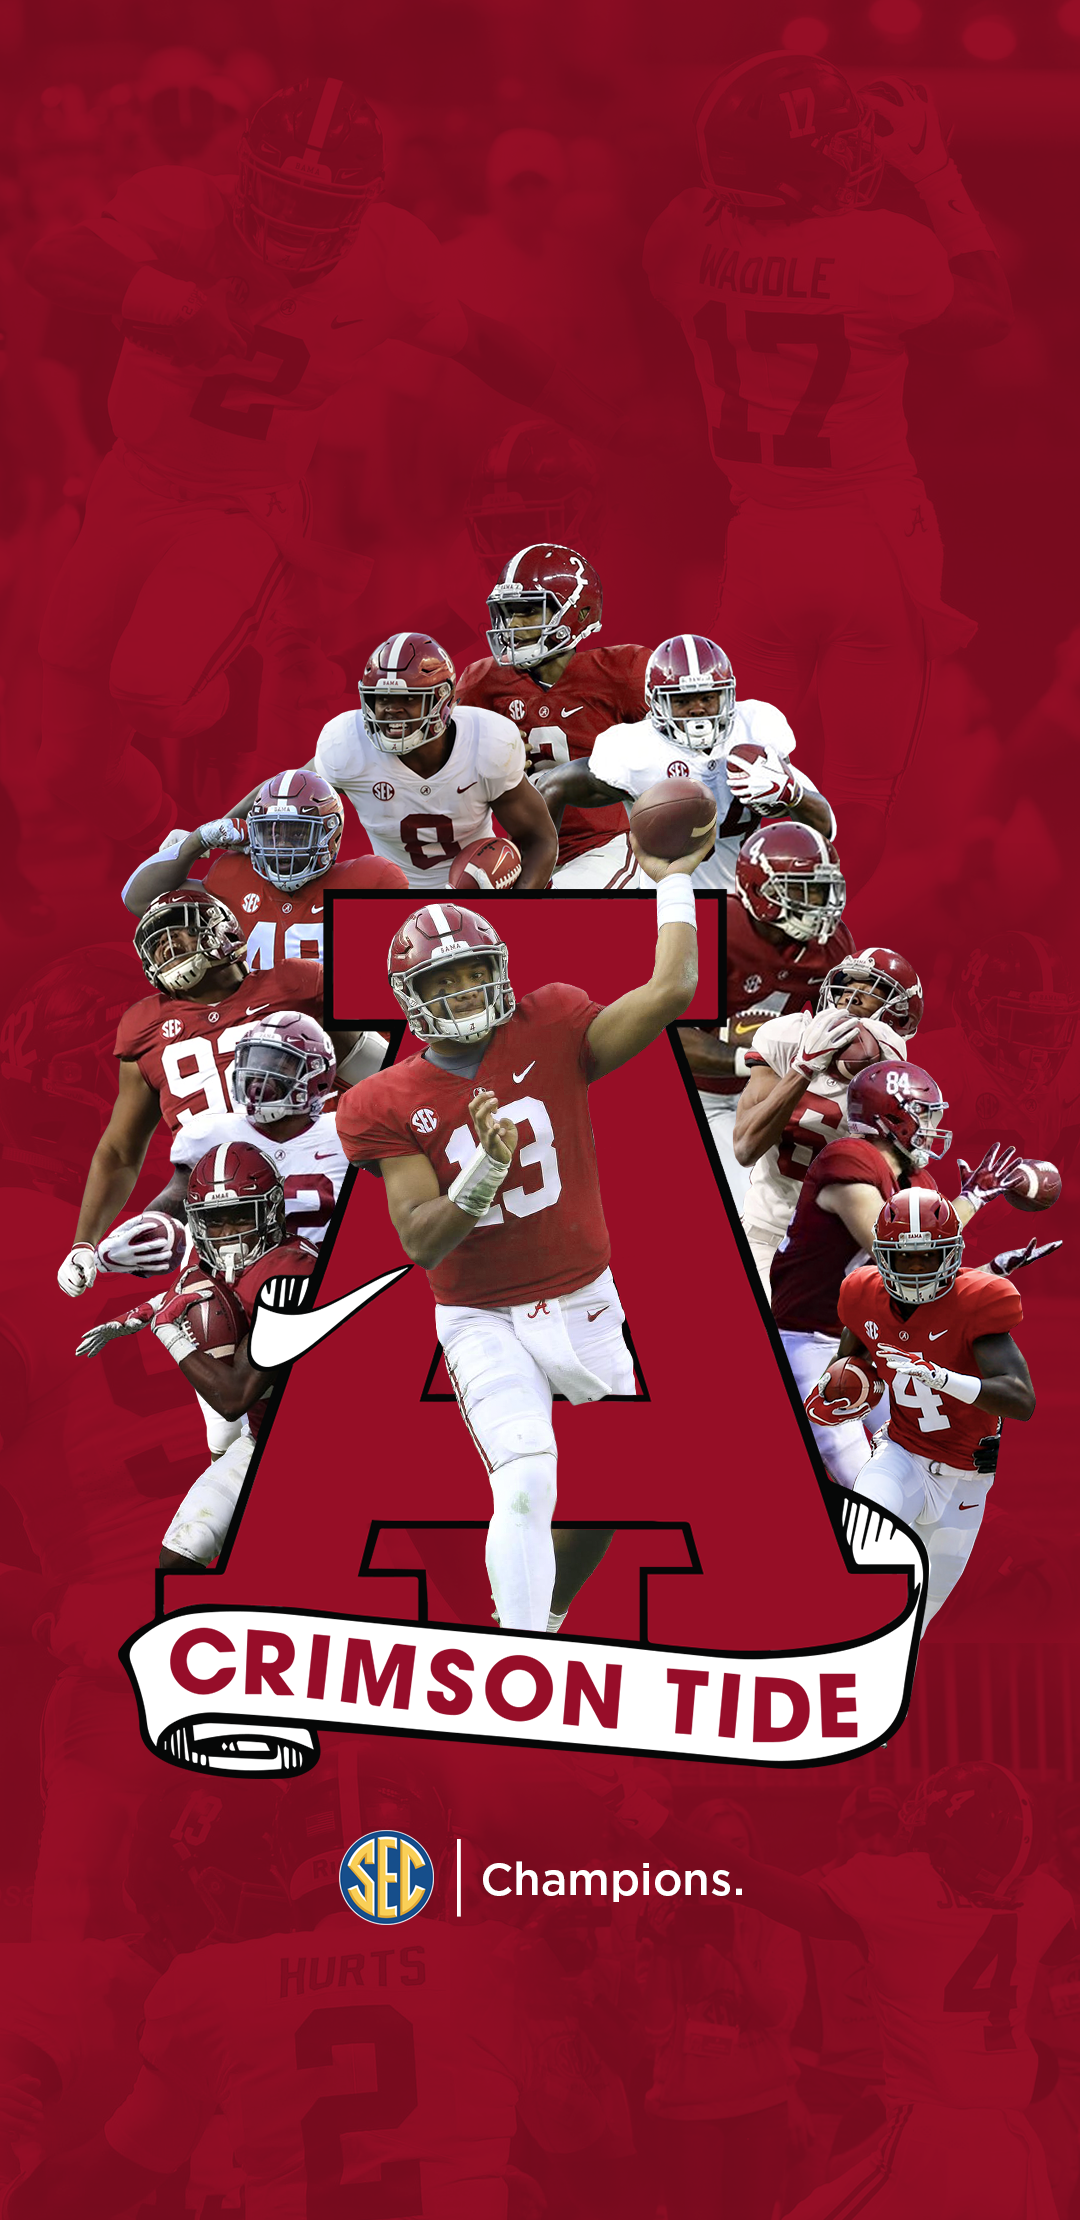 Sec Champions Phone Wallpaper More Options In The Ments